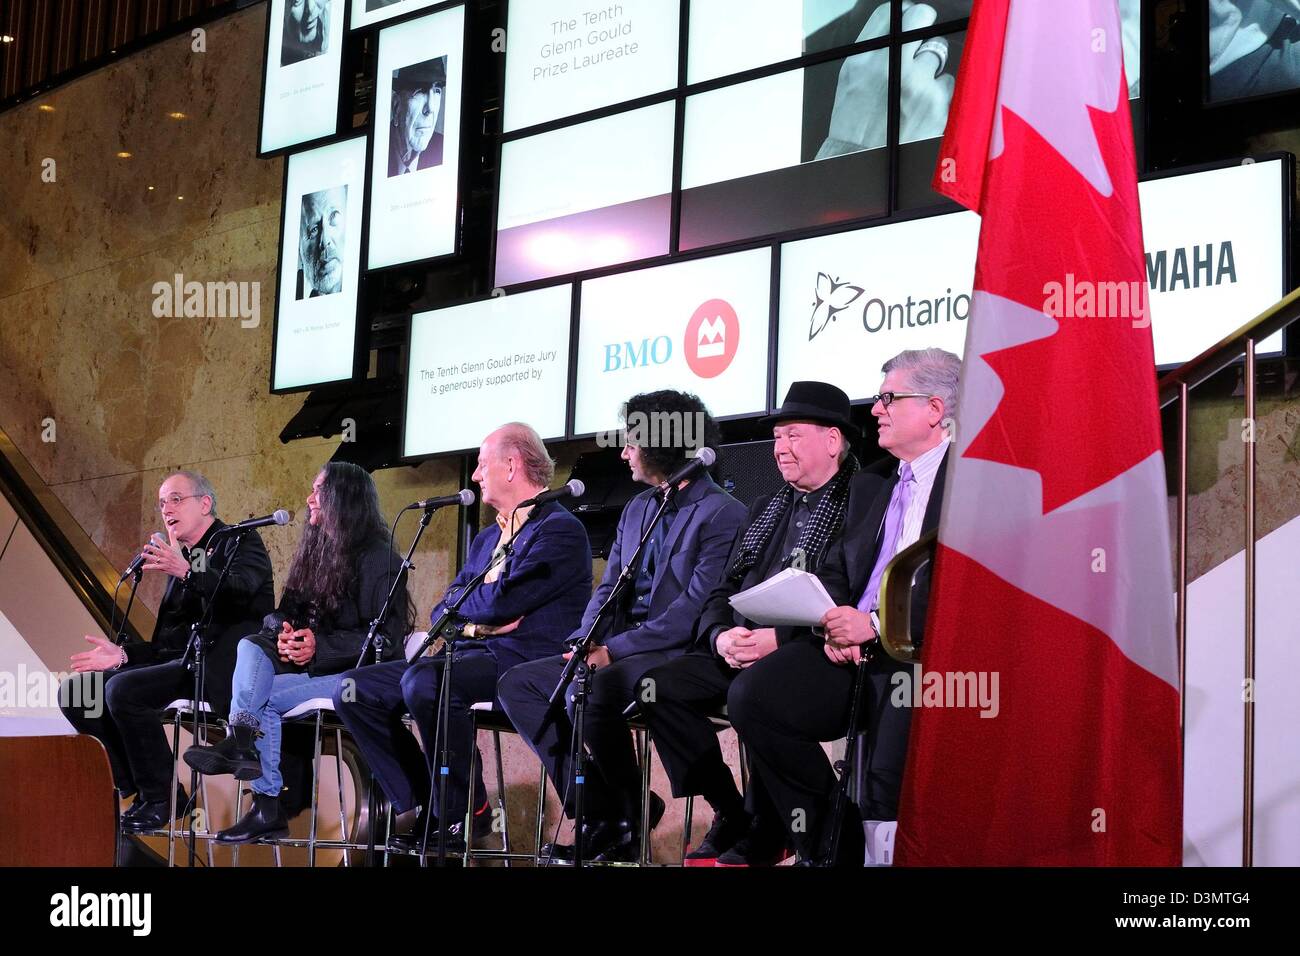 Toronto, Canada. 21st February 2013. Illustrious international jury announces Robert Lepage  as the Laureate of the Tenth Glenn Gould Prize at Toronto's  Sony Centre for the Performing Arts. In picture, Bob Ezrin, Deepa Mehta, John Ralston Saul, Rolando Villazon, Paul Hoffert, and Brian Levine.  (DCP/N8N)  Credit:  n8n photo / Alamy Live News Stock Photo